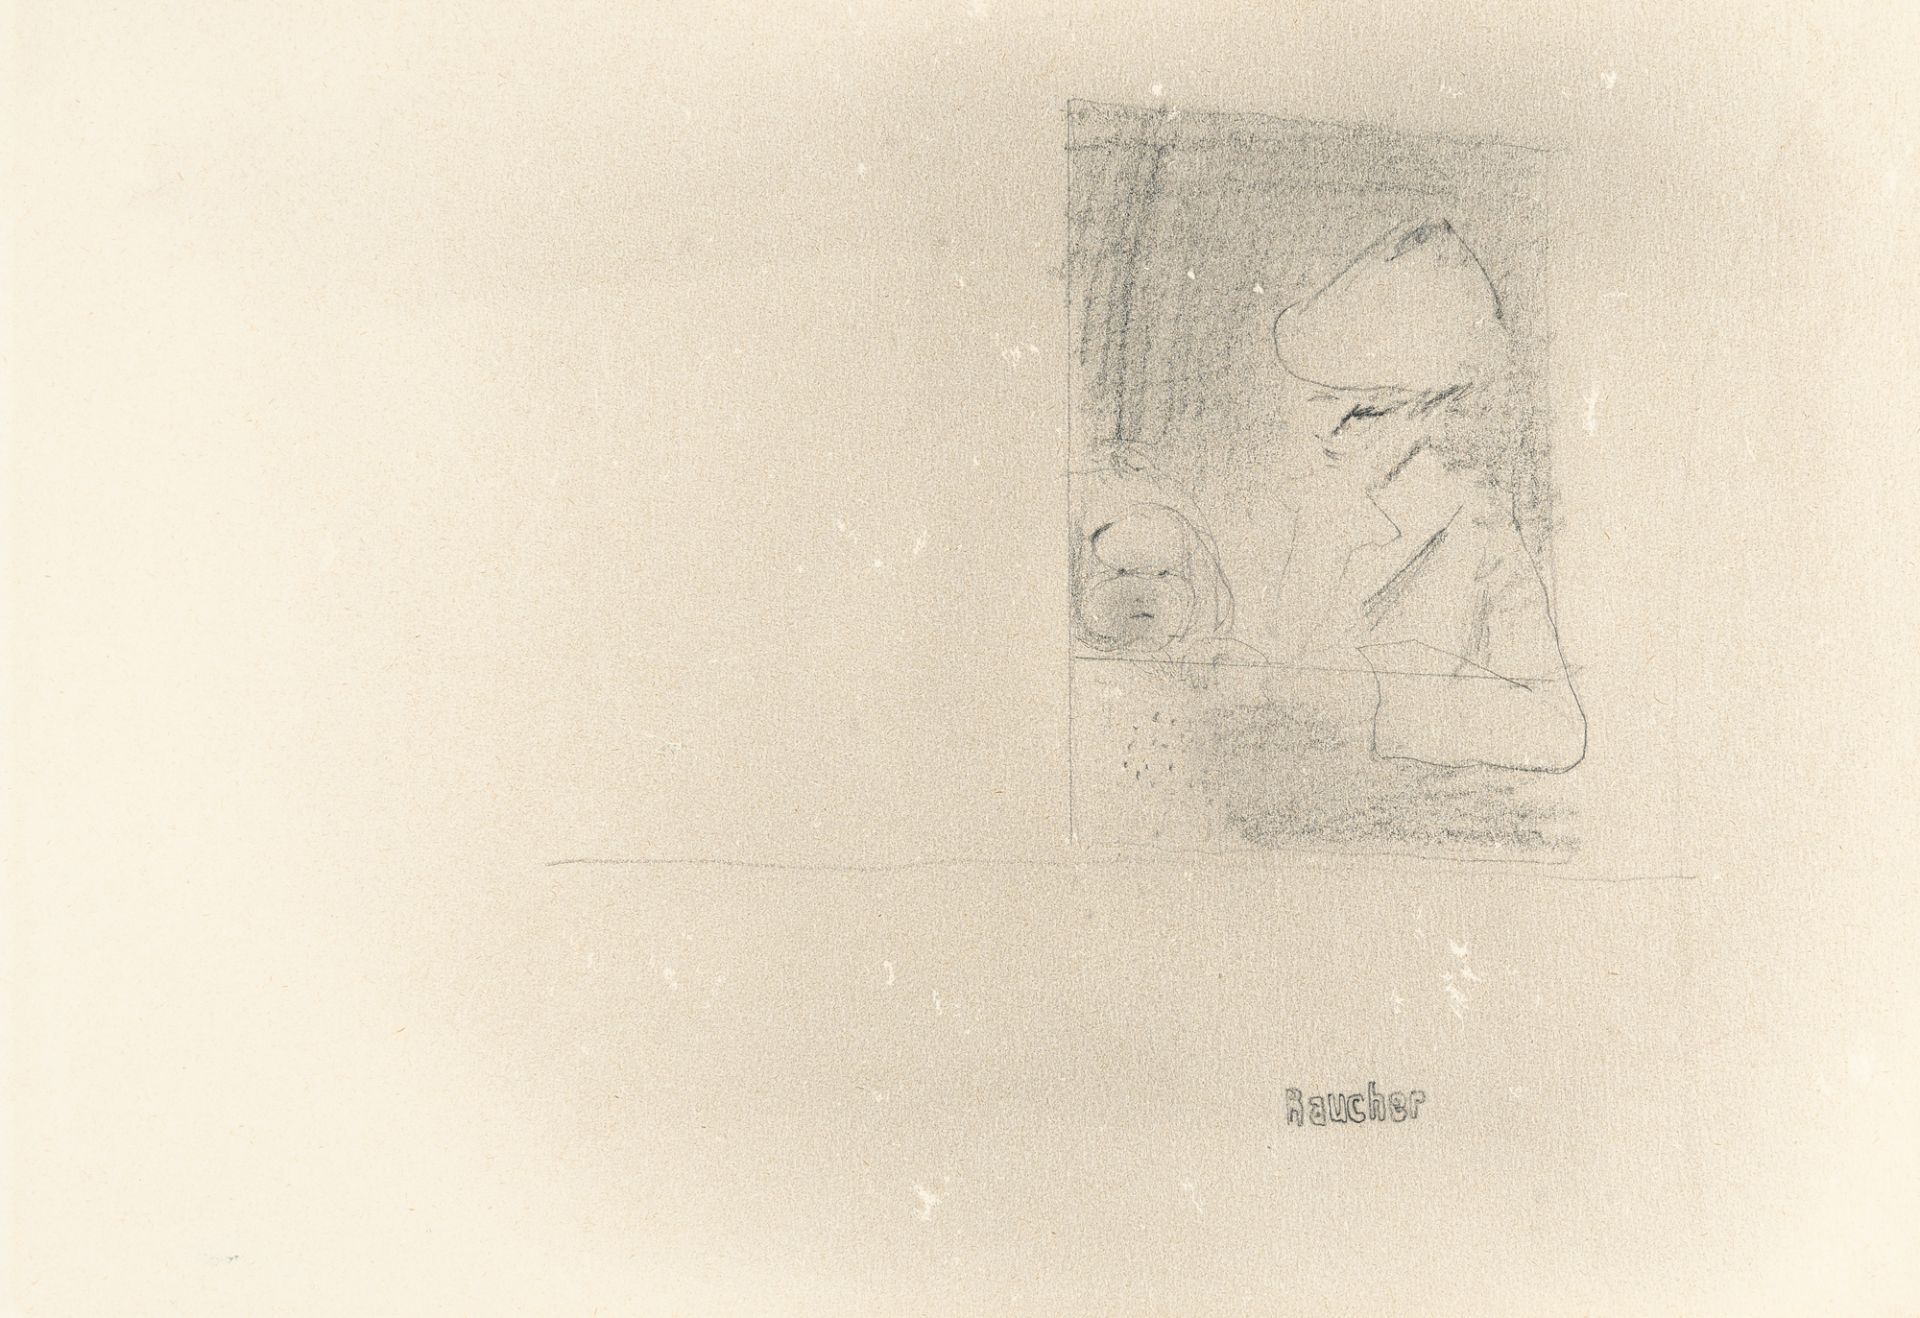 Gerhard Richter (1932 Dresden), “Smoker”Pencil on paper. (19)64. Ca. 27.5 x 39.5 cm. Signed and